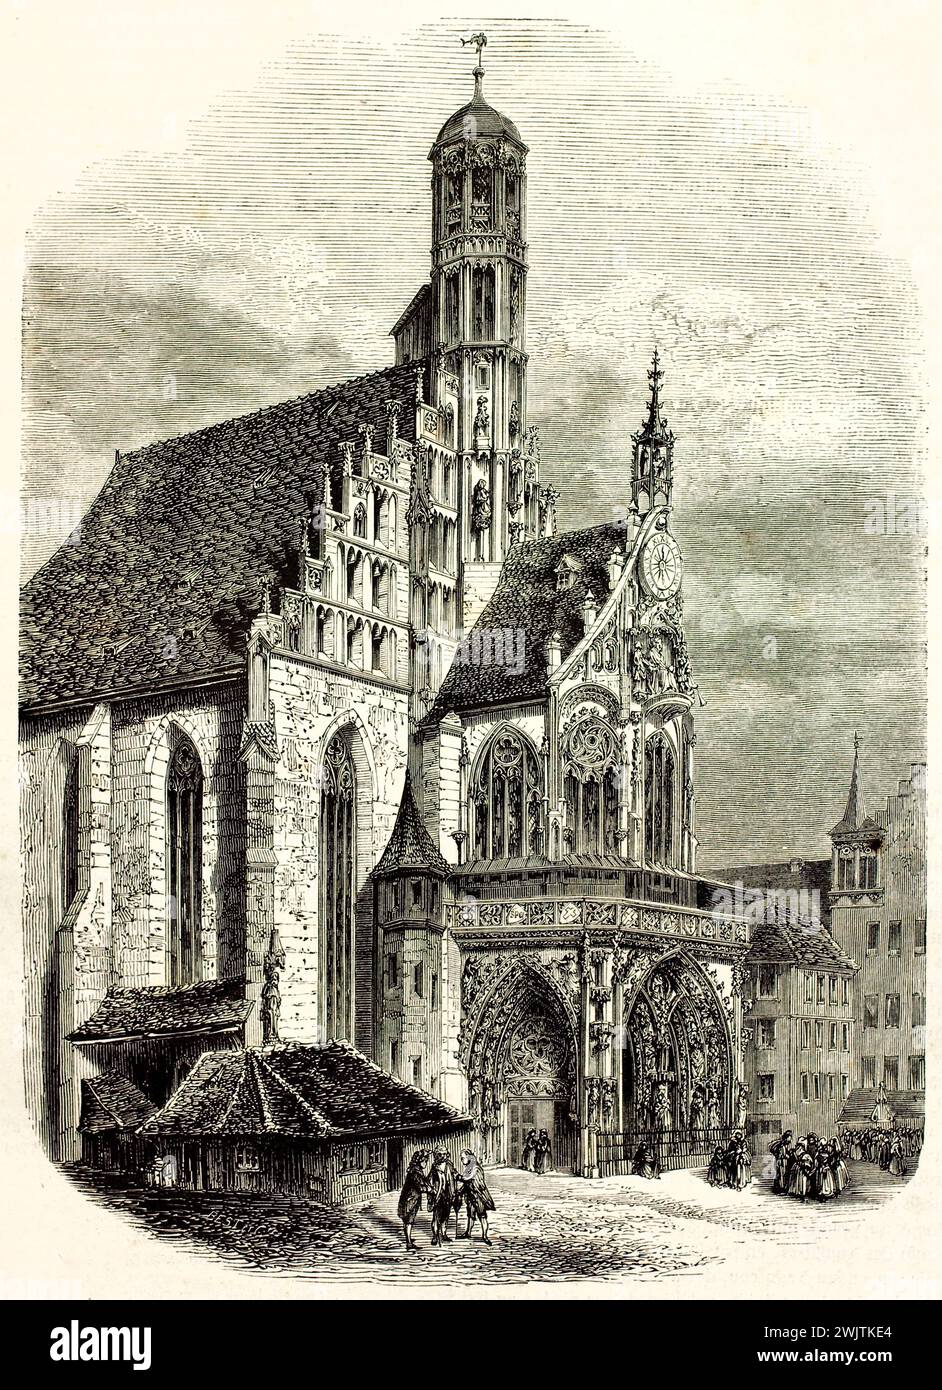 Old engraved illustration of Frauenkirche, Nuremberg. Created by Lancelot, published on Magasin Pittoresque, Paris, 1852. Stock Photo